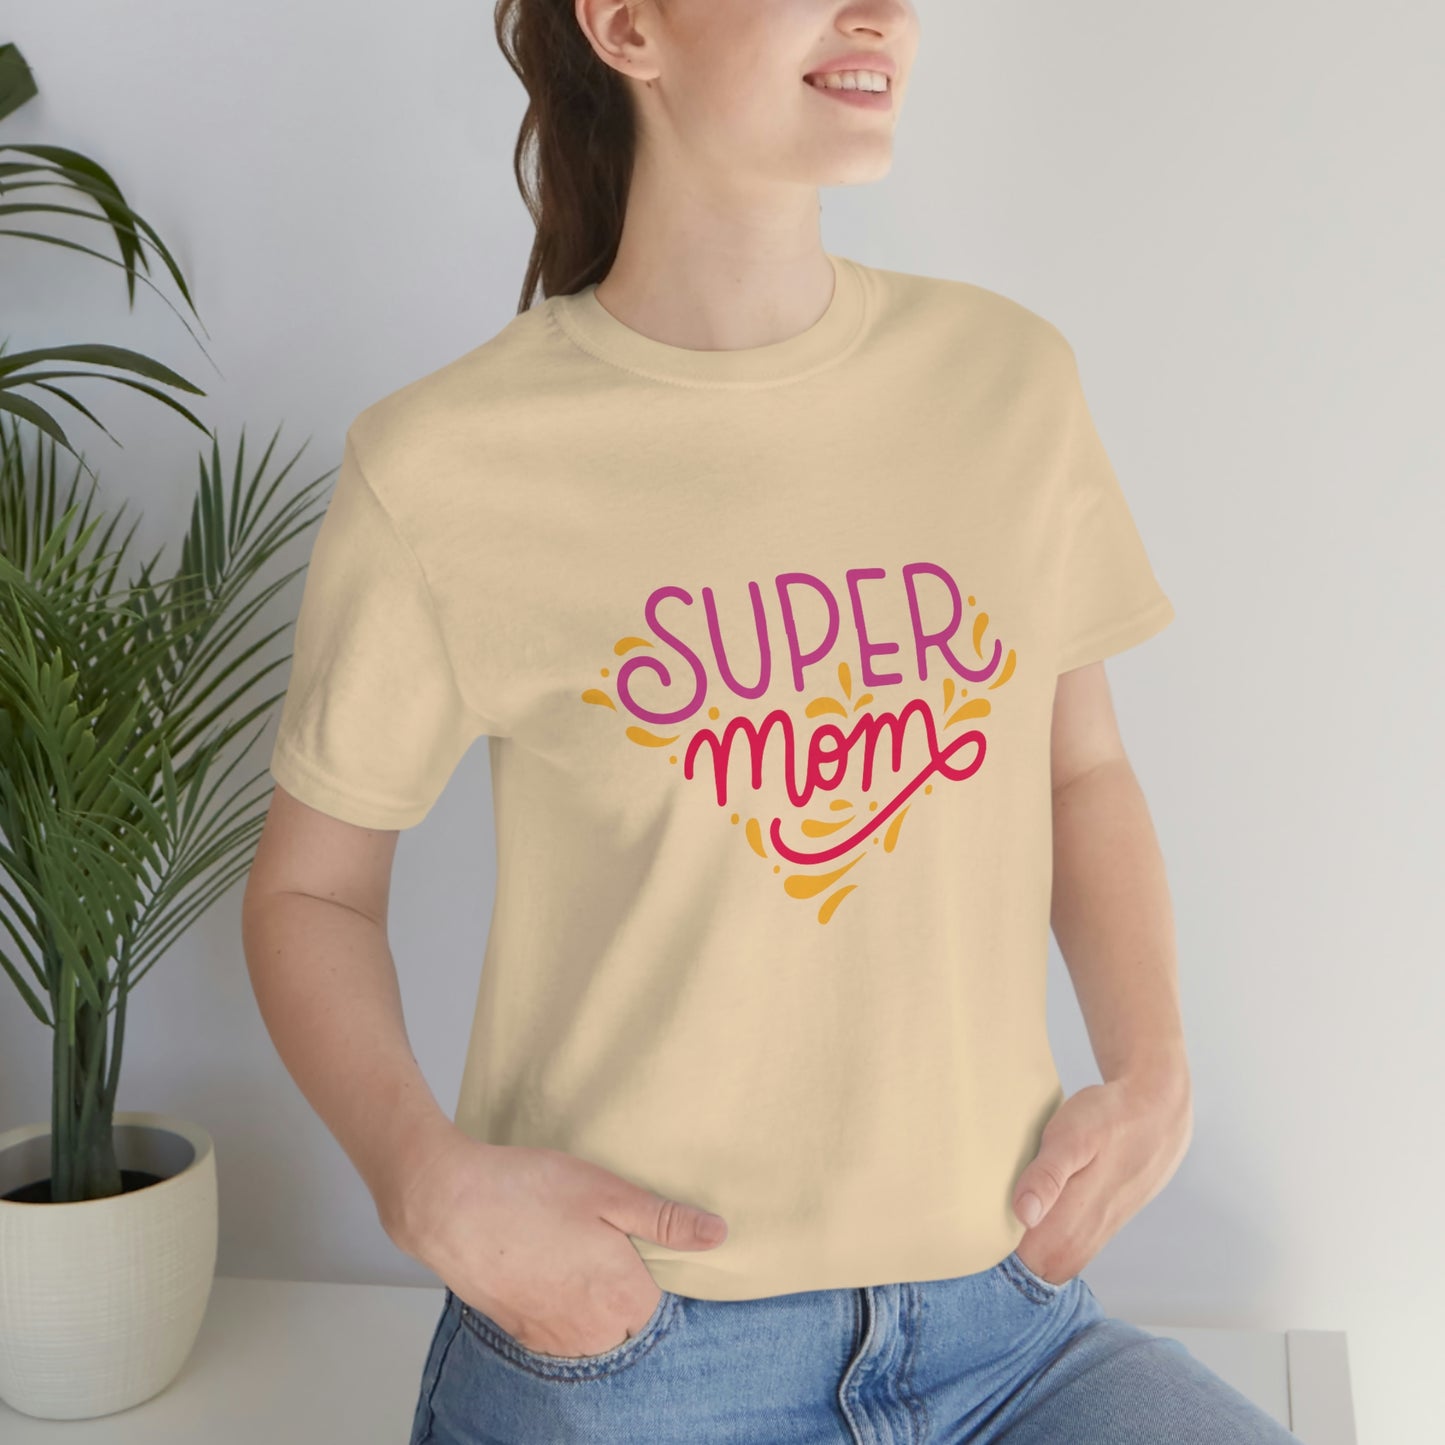 Super lovable design for the perfect Mothersday gift. Super mom soft cream T-shirt is carefully crafted with high-quality materials, is both comfortable and durable, making it a versatile addition to any mom's wardrobe.